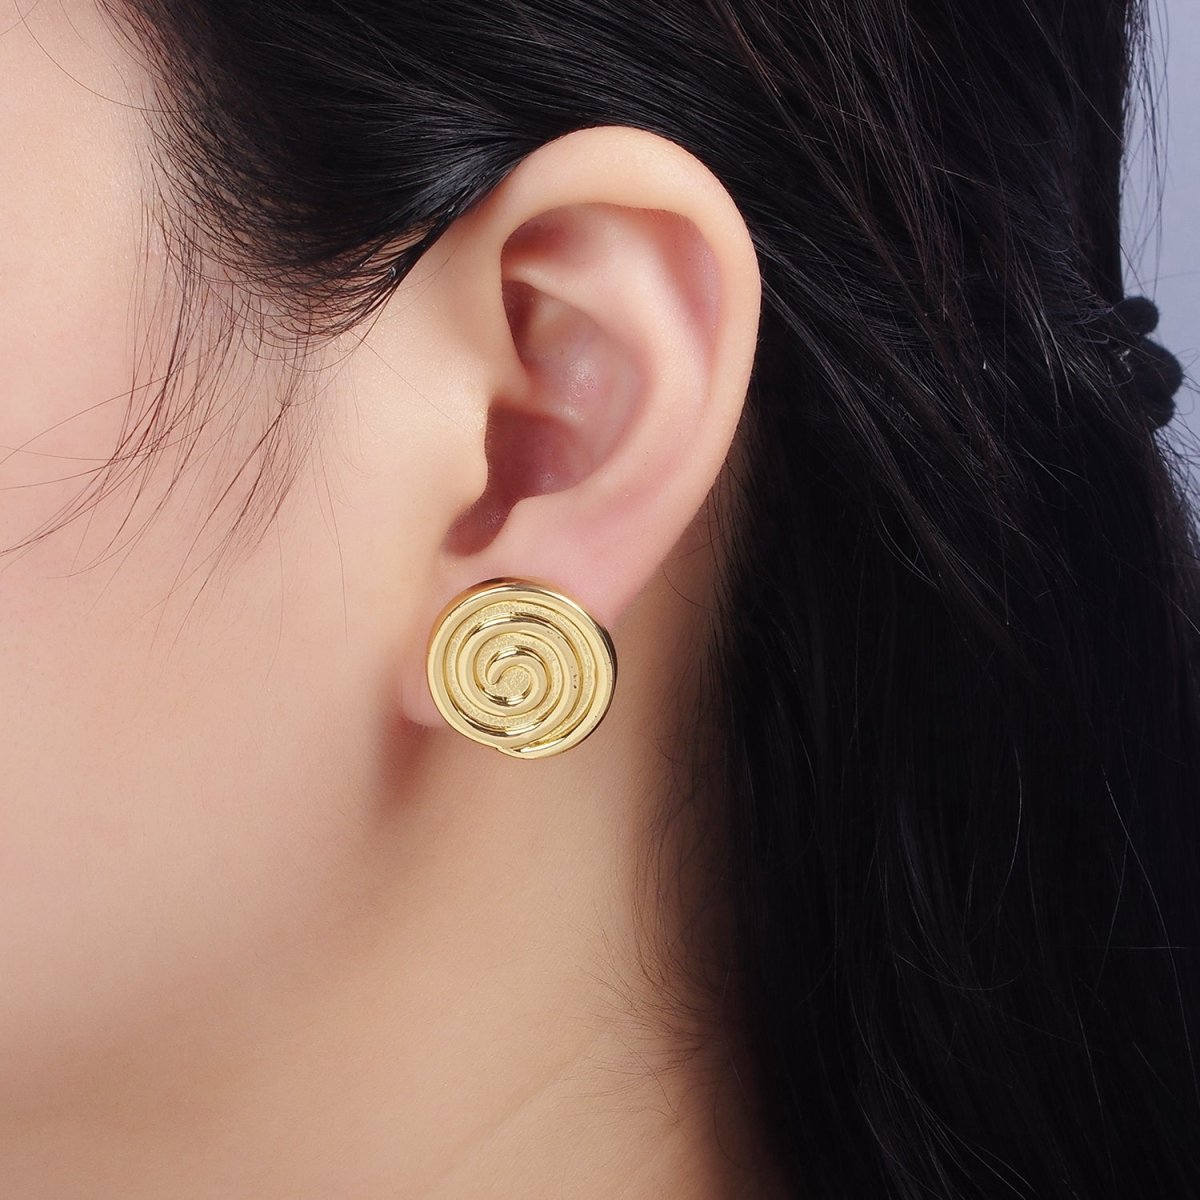 14K Gold Filled 20mm Circular Round Stud Earrings | Q081 - DLUXCA